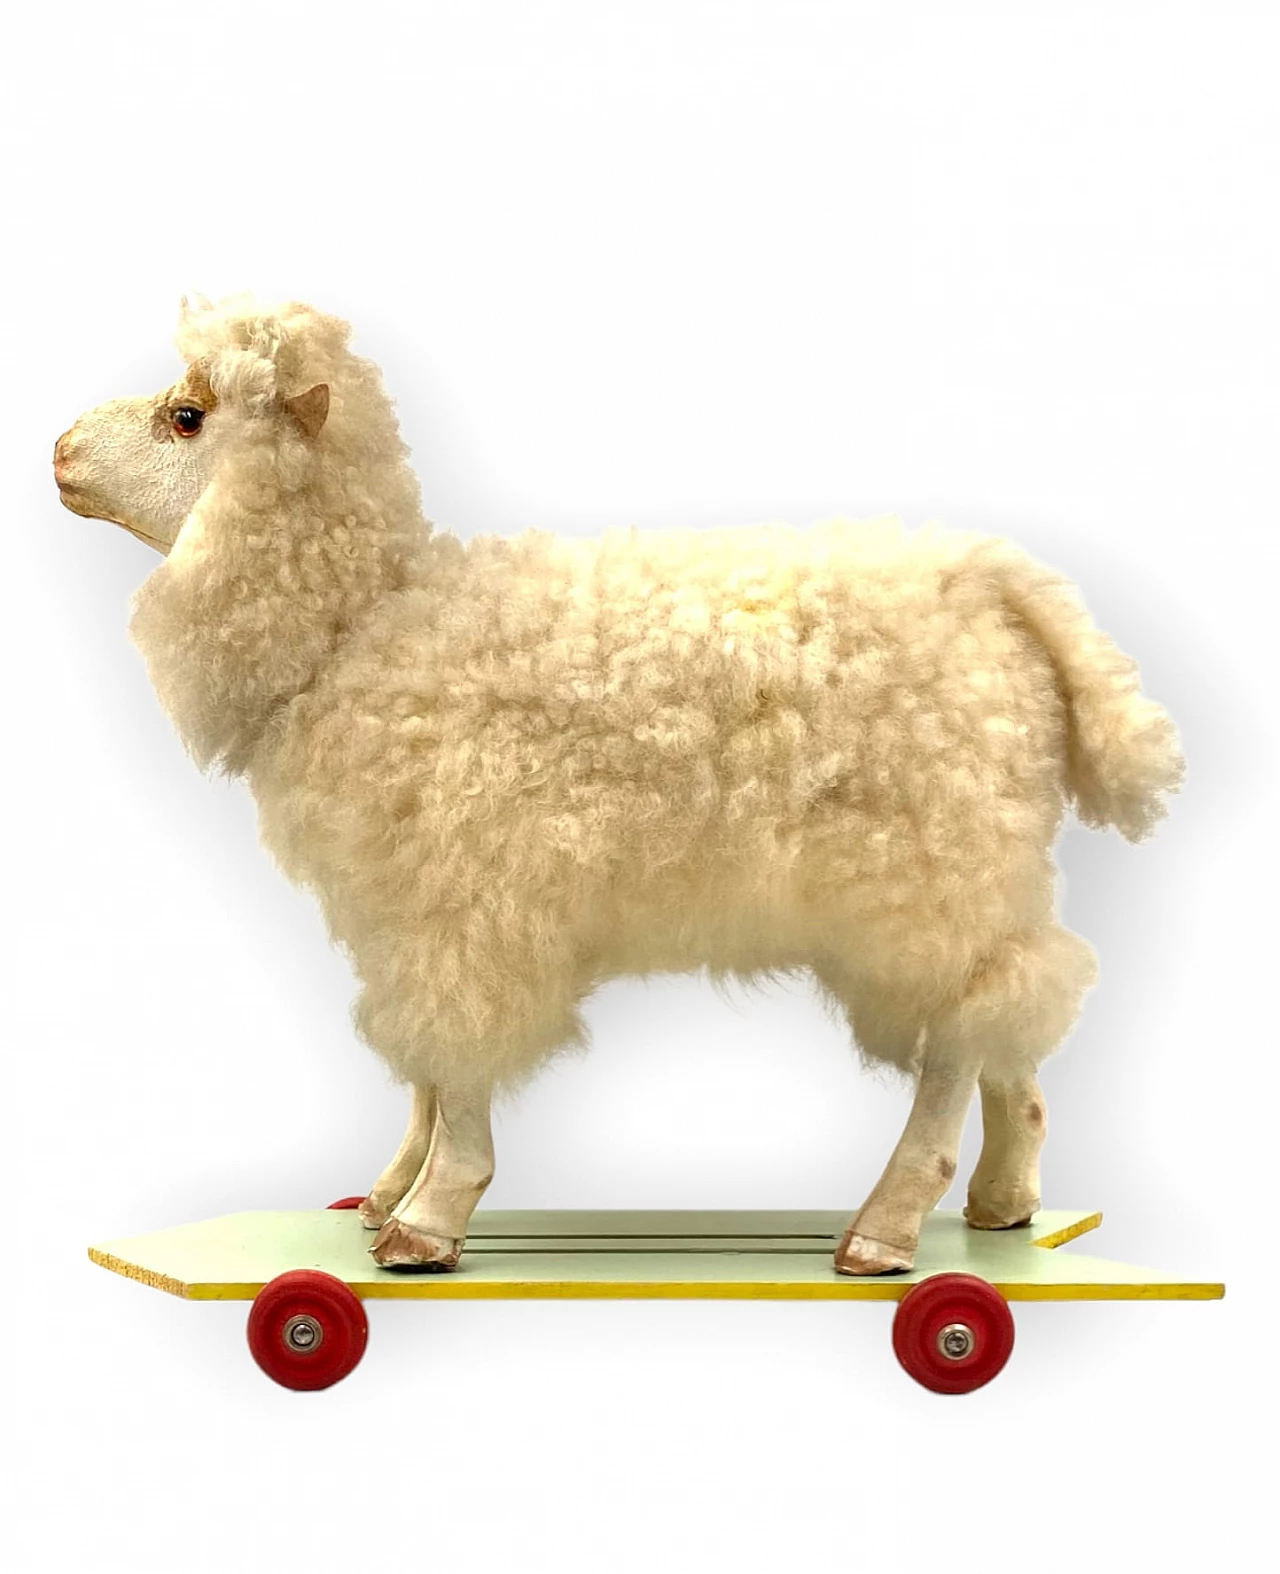 Wool and wood toy sheep with wheels 7